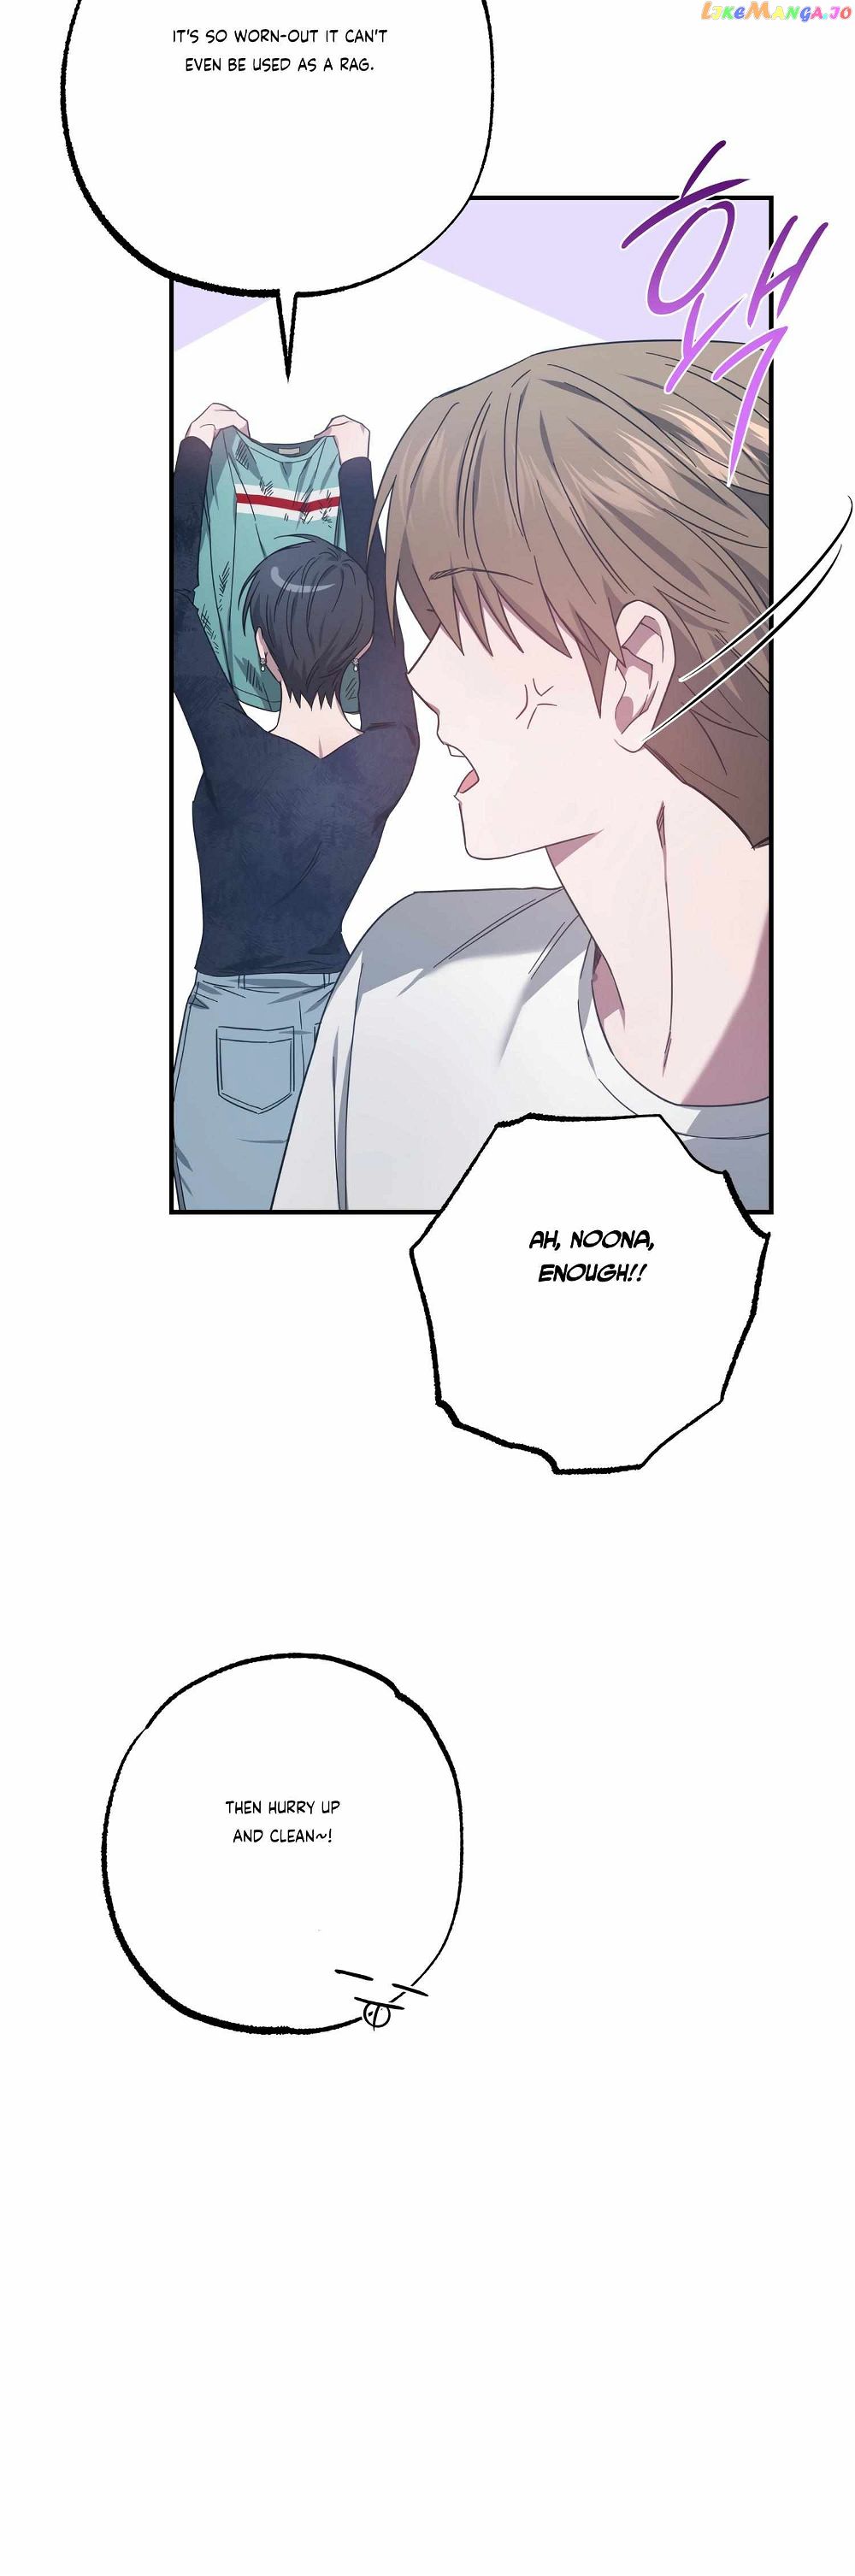 Mijeong’s Relationships chapter 36 - Page 29